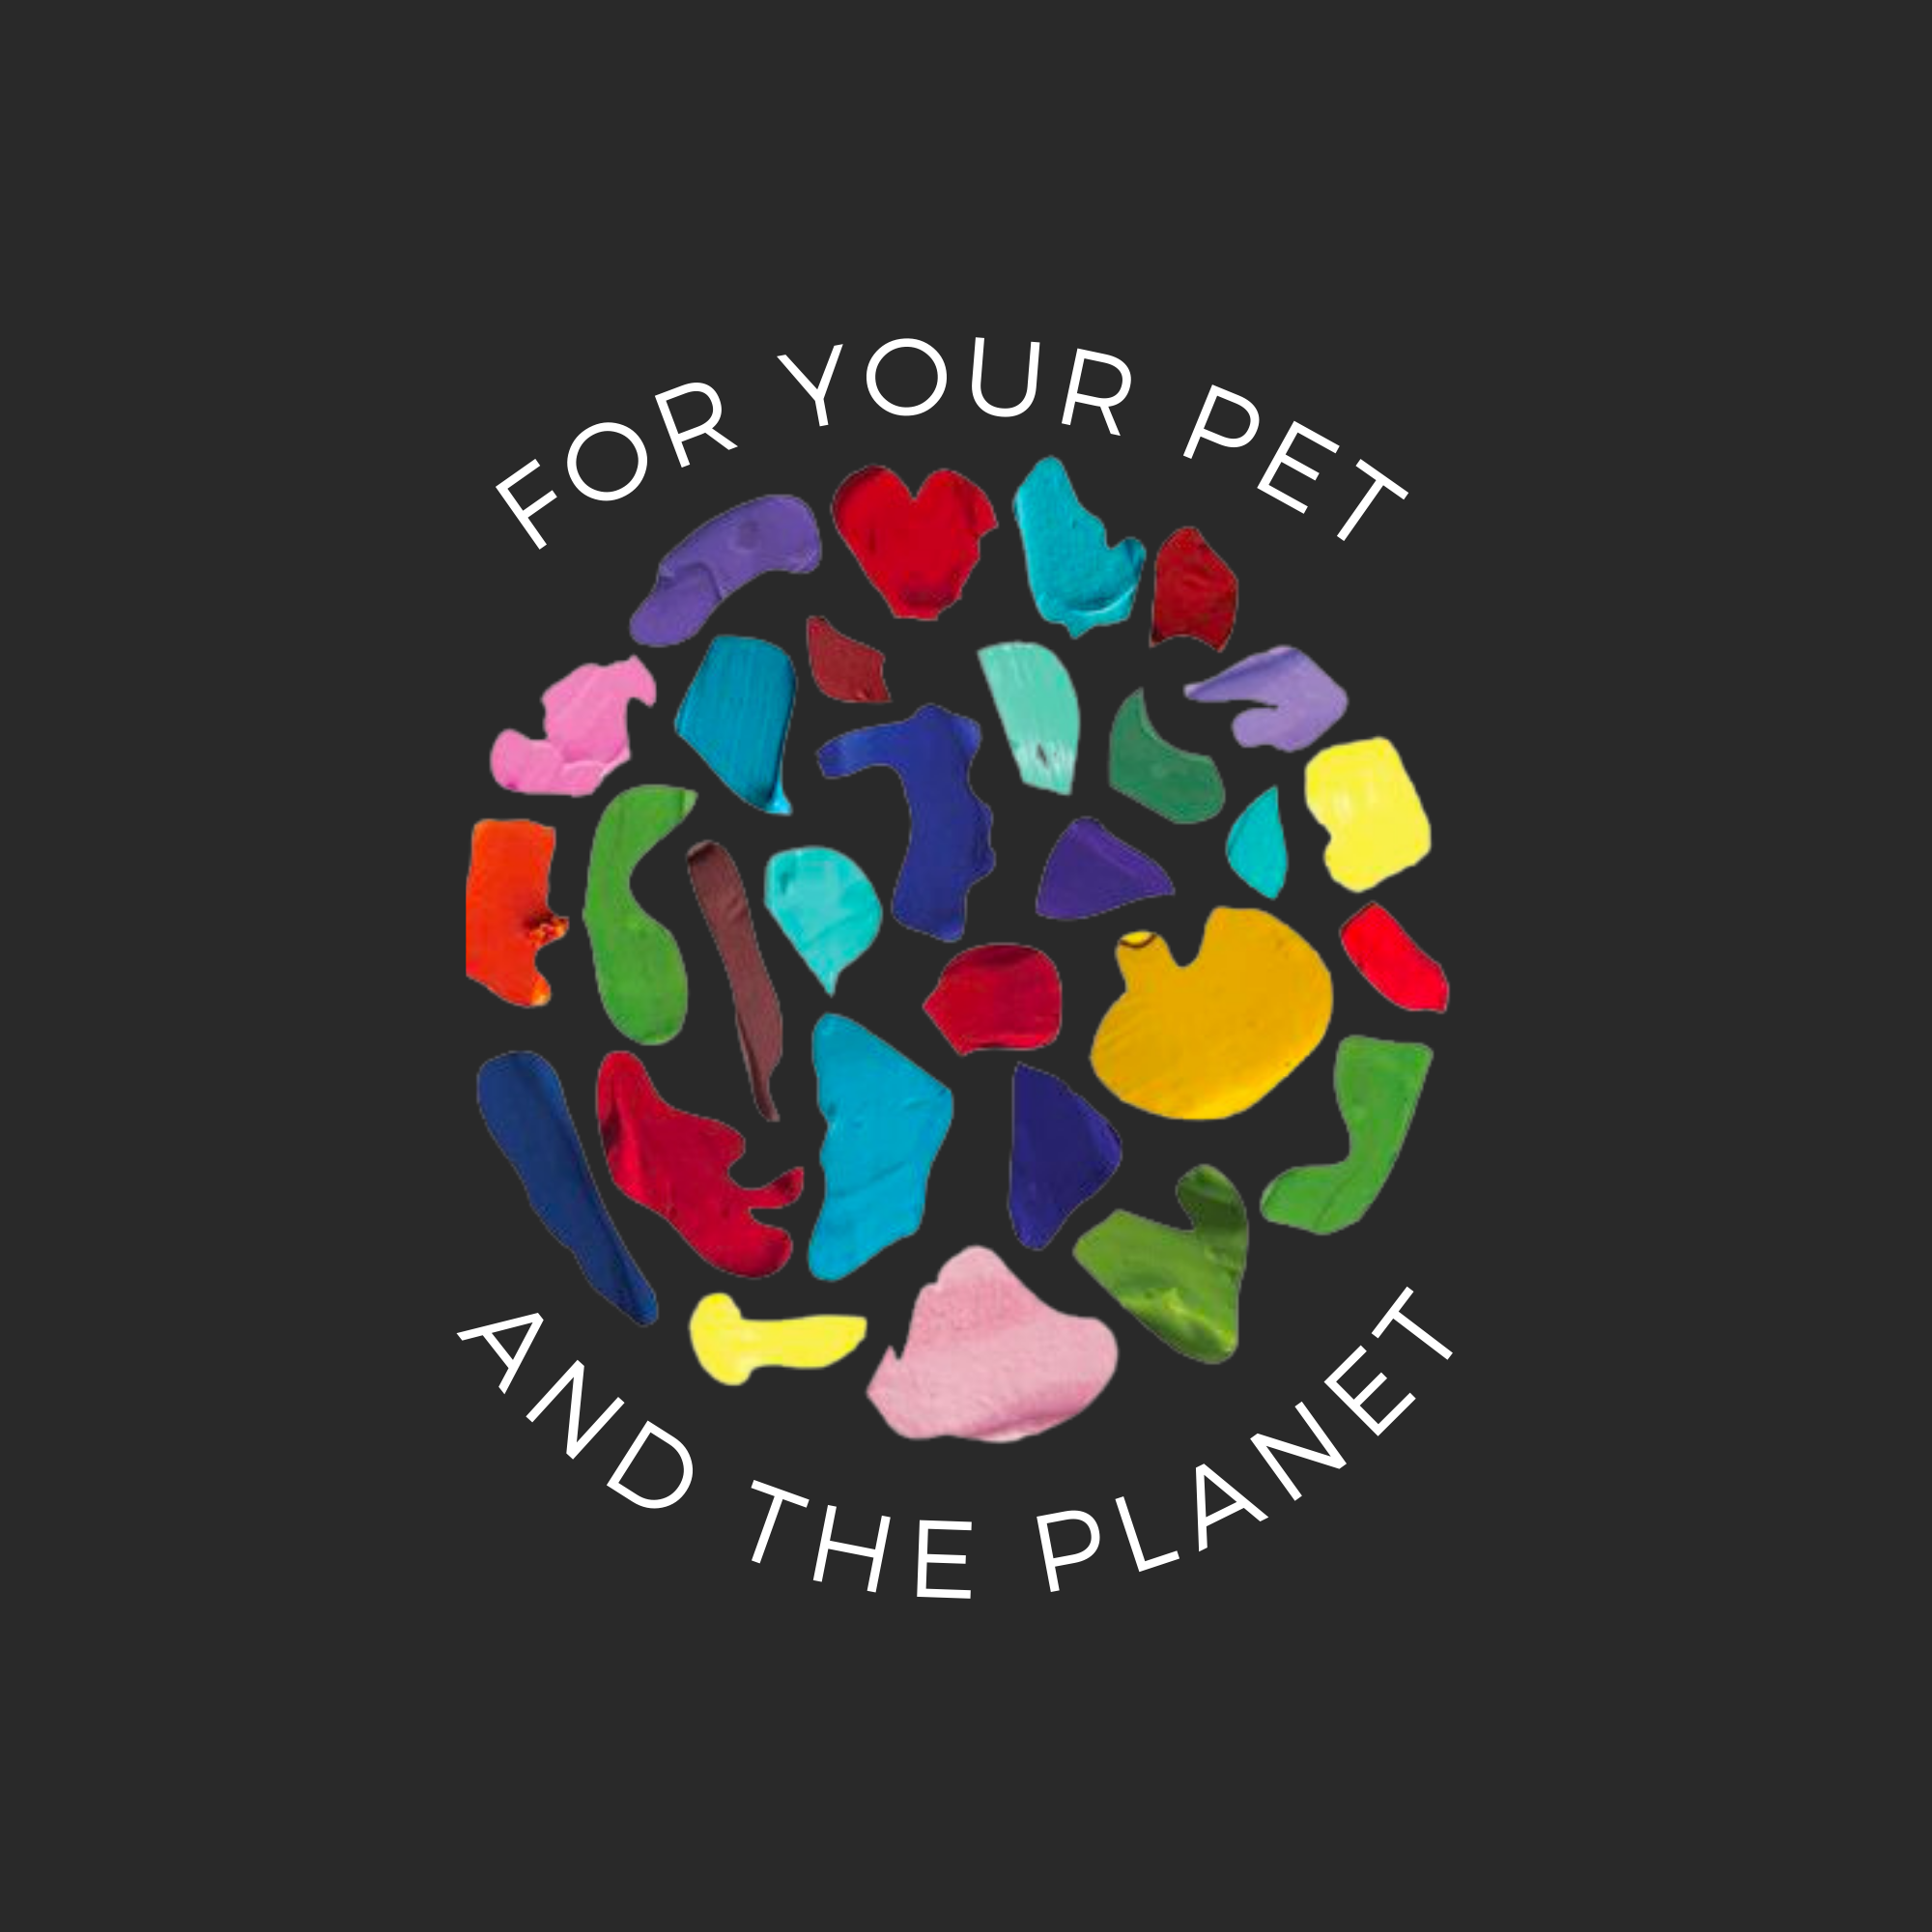 Bella and Boot's new logo with the words "for your pet and the planet" curved around it